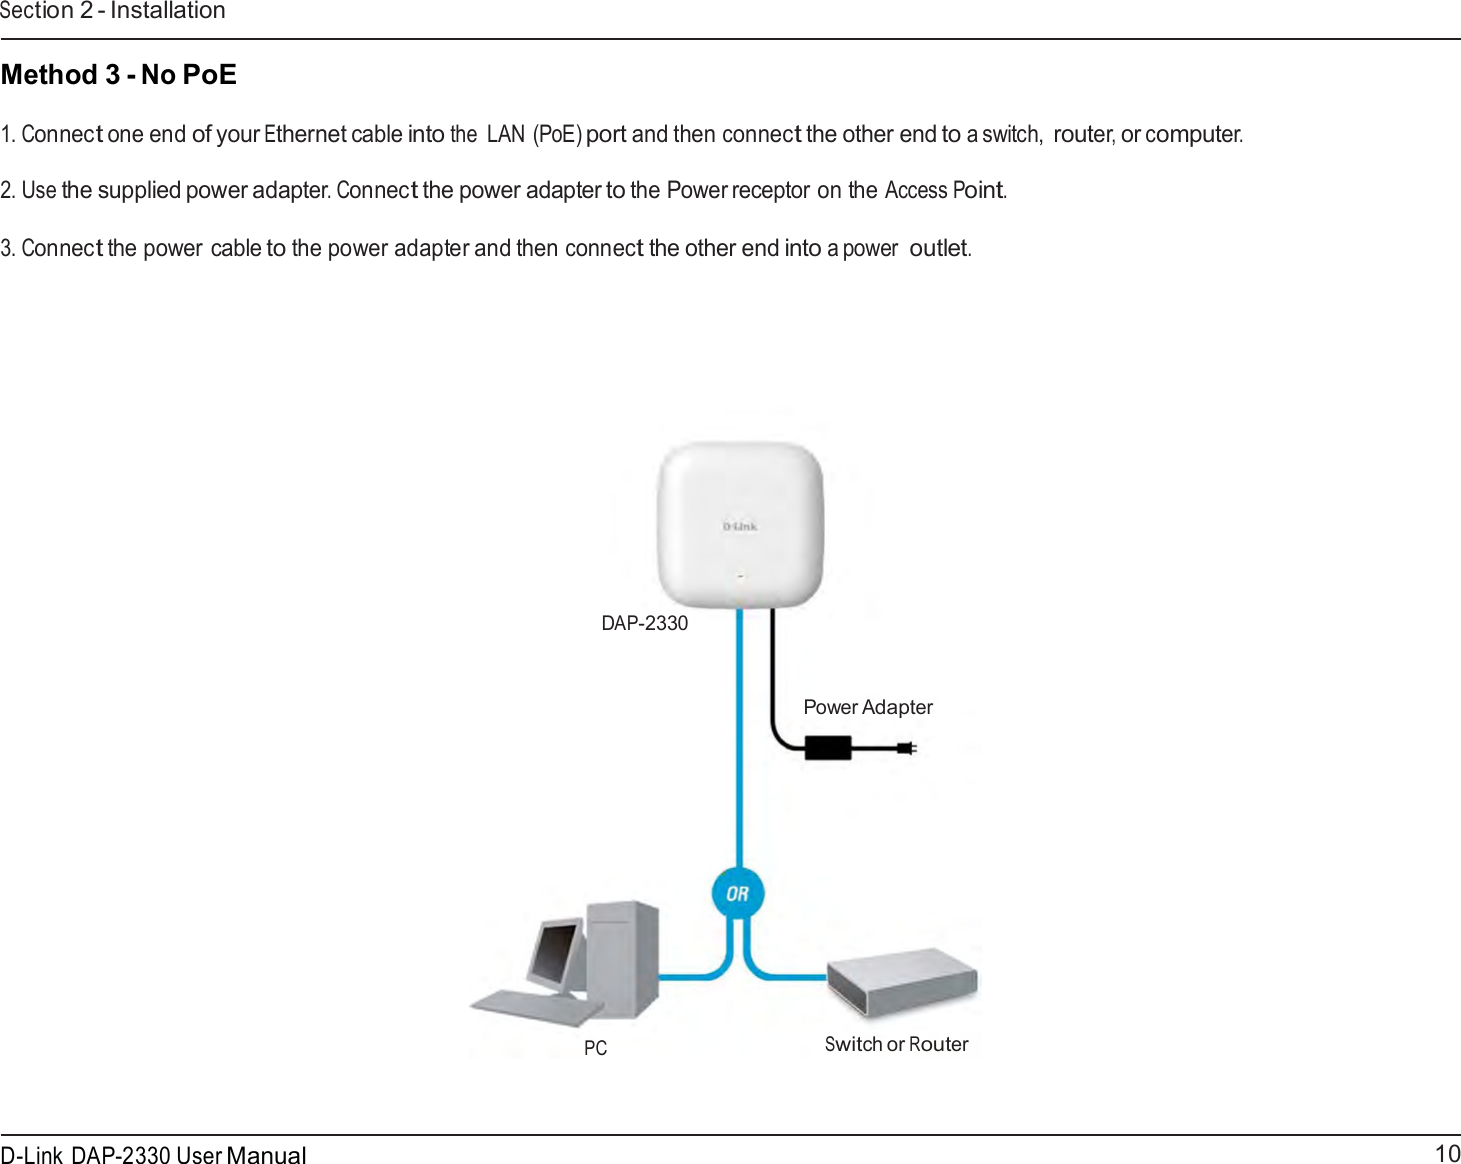 10 D-Link DAP-2330 User ManualSection 2 - Installation     Method 3 - No PoE  1. Connect one end of your Ethernet cable into the  LAN (PoE) port and then connect the other end to a switch, router, or computer.  2. Use the supplied power adapter. Connect the power adapter to the Power receptor on the Access Point.  3. Connect the power cable to the power adapter and then connect the other end into a power outlet.                  DAP-2330    Power Adapter                PC Switch or Router 